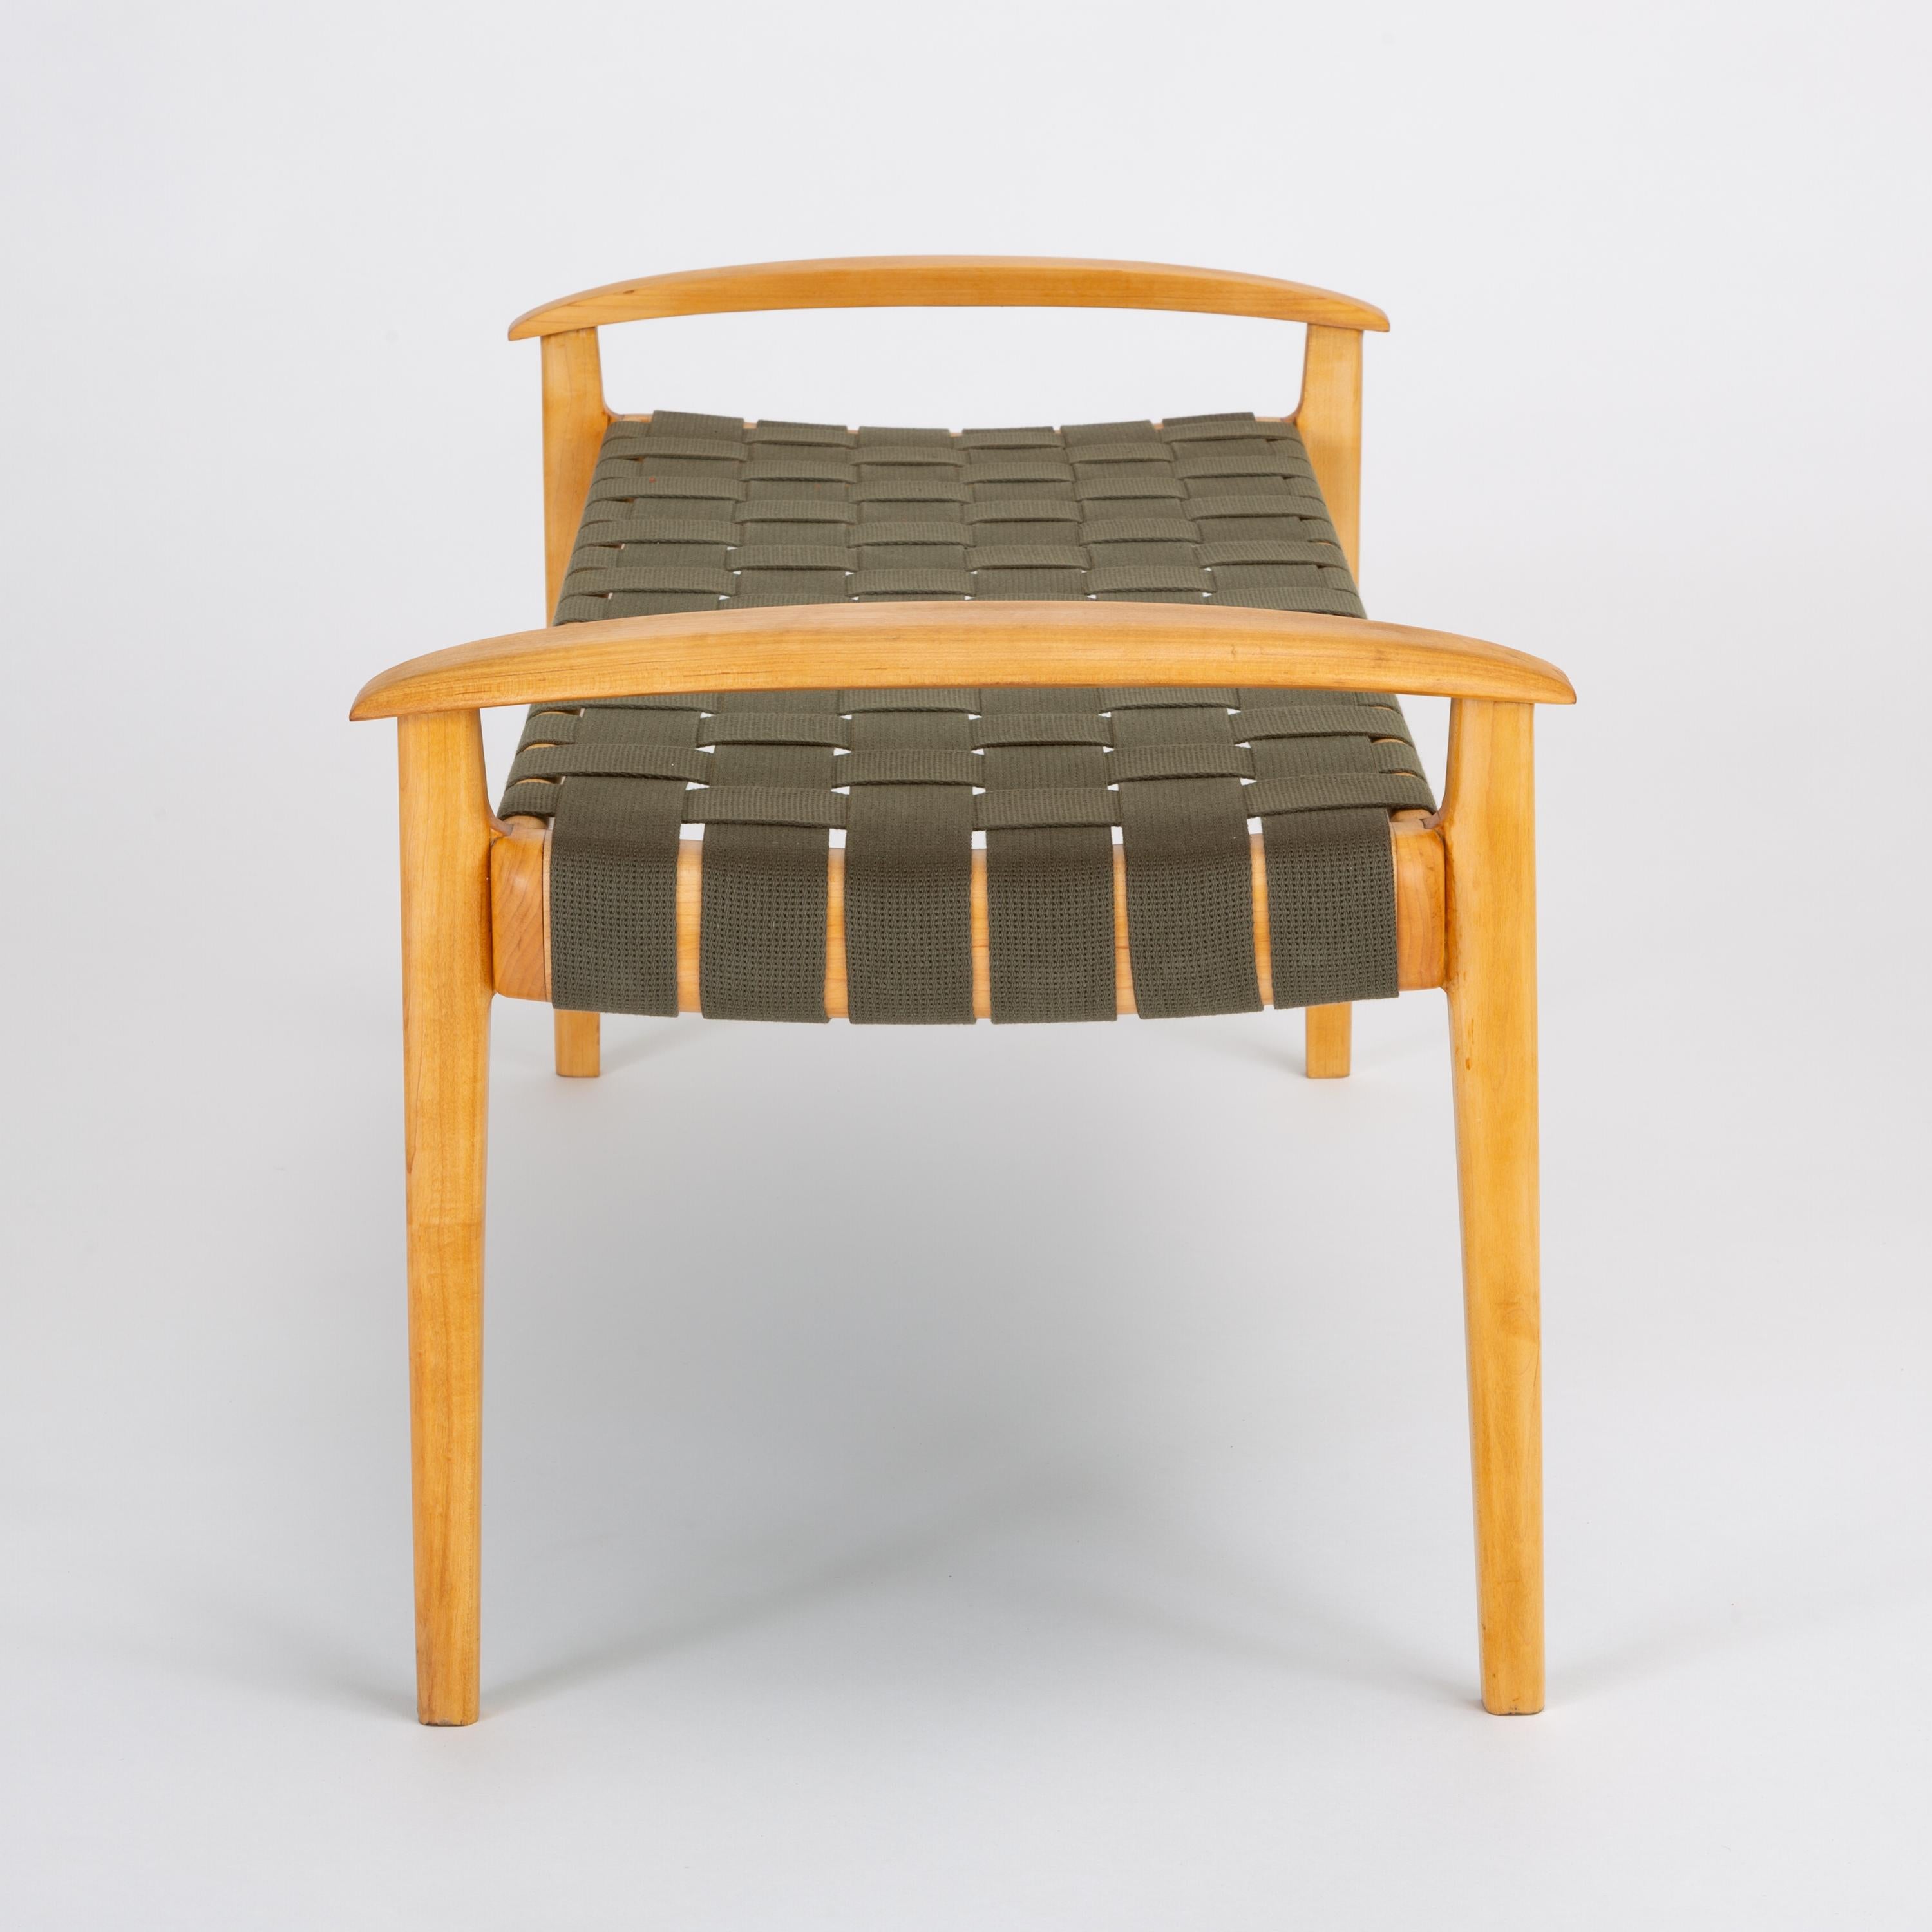 American-Made Maple Bench with Woven Seat by Tom Ghilarducci 4